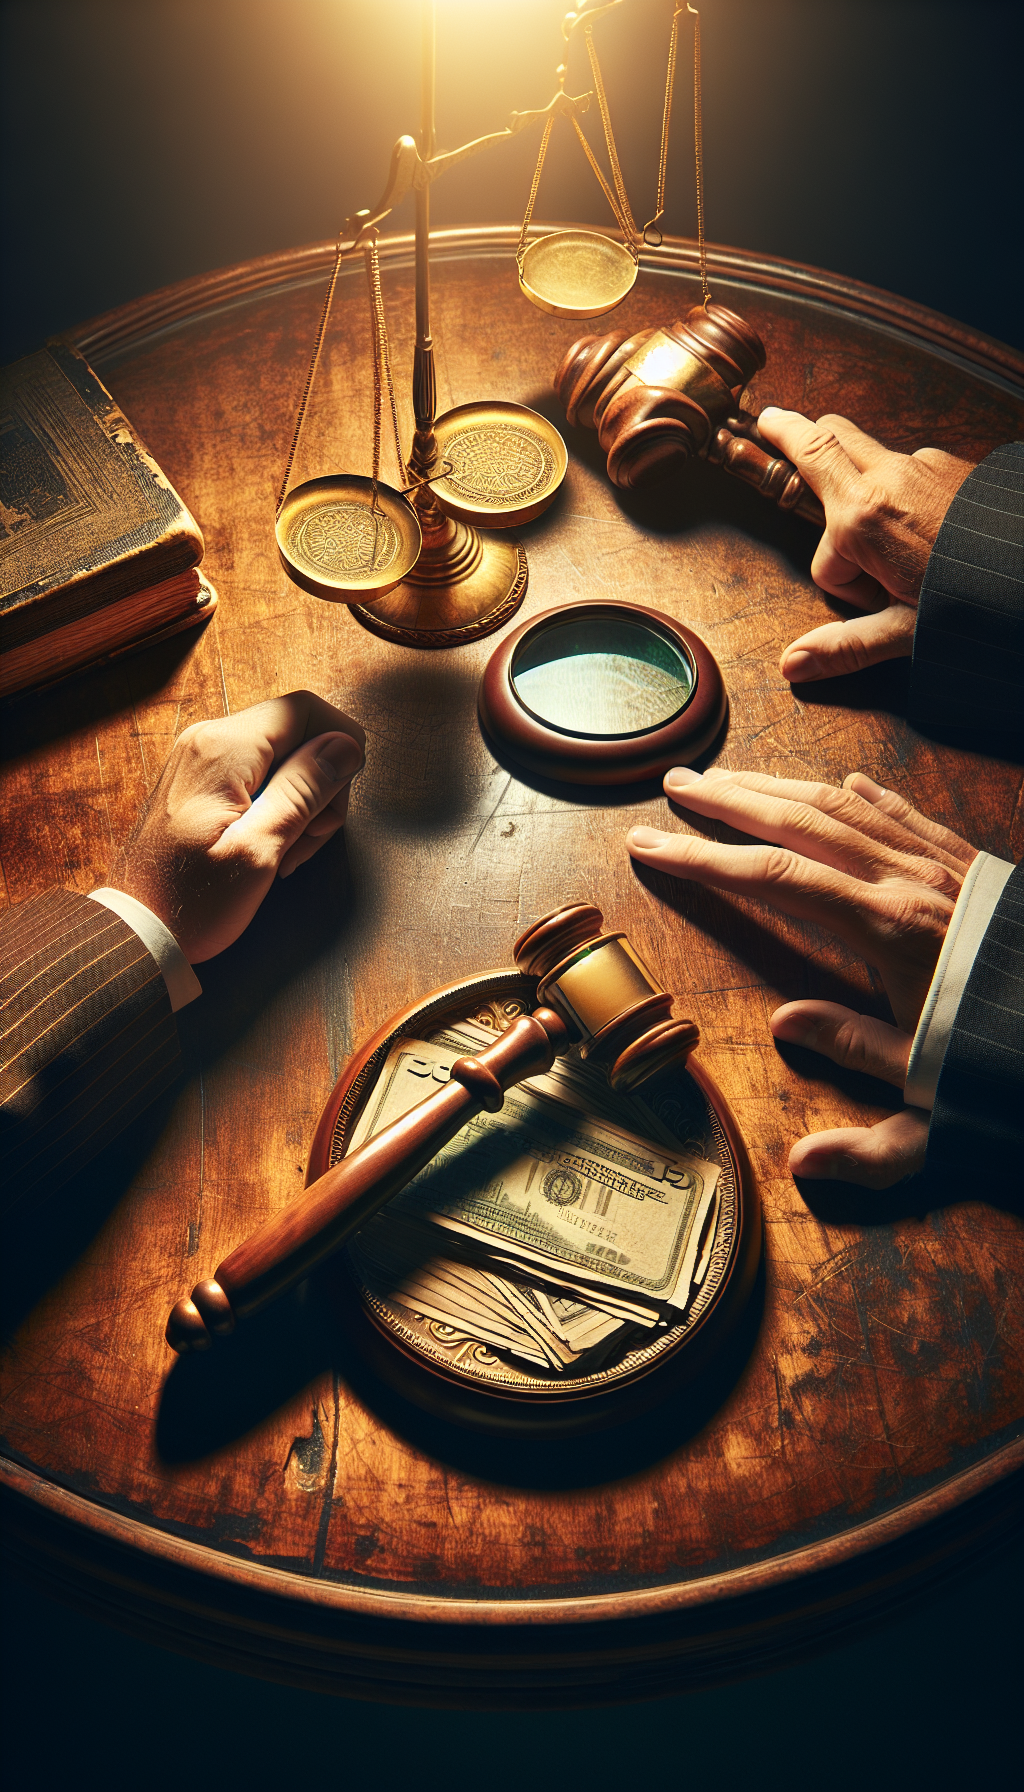 An elegantly aged wooden desk is partially cloaked in the golden glow of an appraiser's magnifying glass. A gavel and a stack of weathered cash sit atop, while a handshake merges from above, casting a distinct shadow of agreement on the desk's surface. The scene captures the moment of sale, blending valuation authenticity with the tangible excitement of a successful antique transaction.